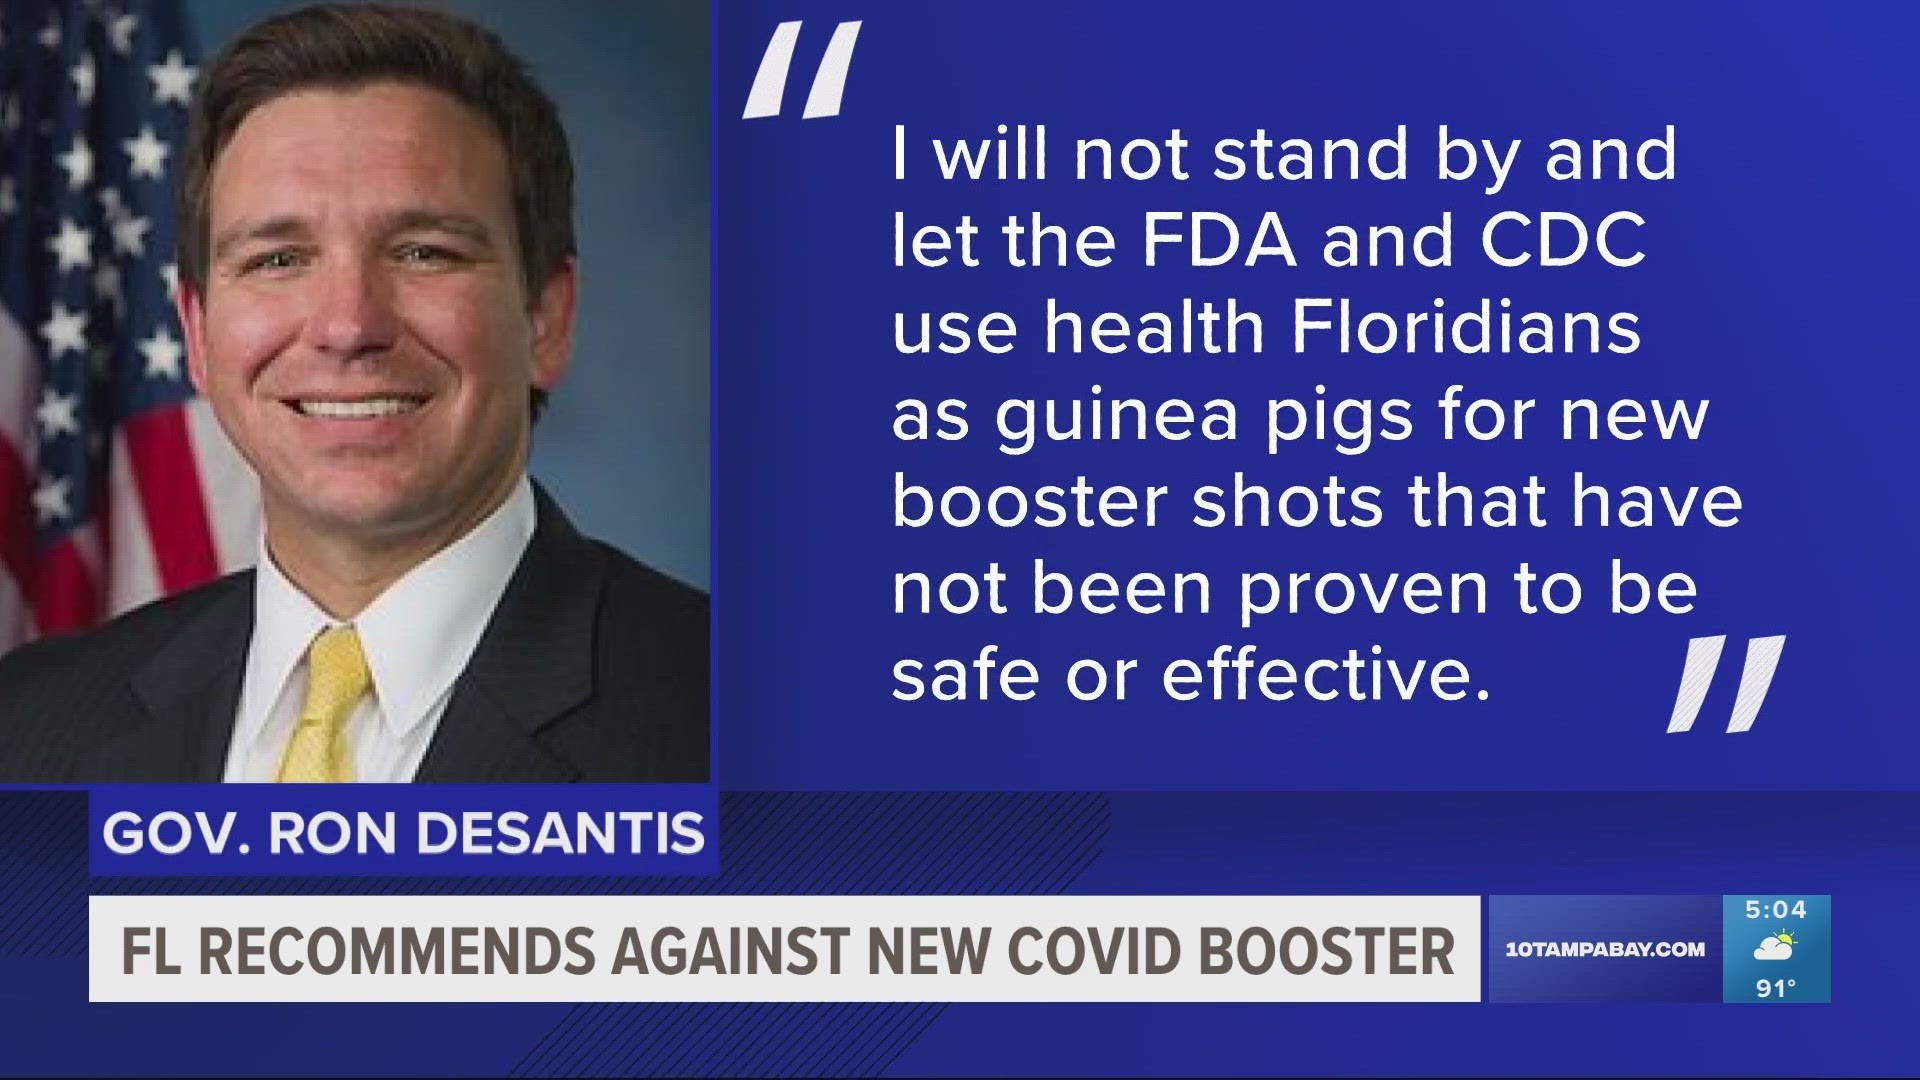 DeSantis and Florida Surgeon General Joseph Ladapo repeated much of what they said a week ago during a live event in Jacksonville